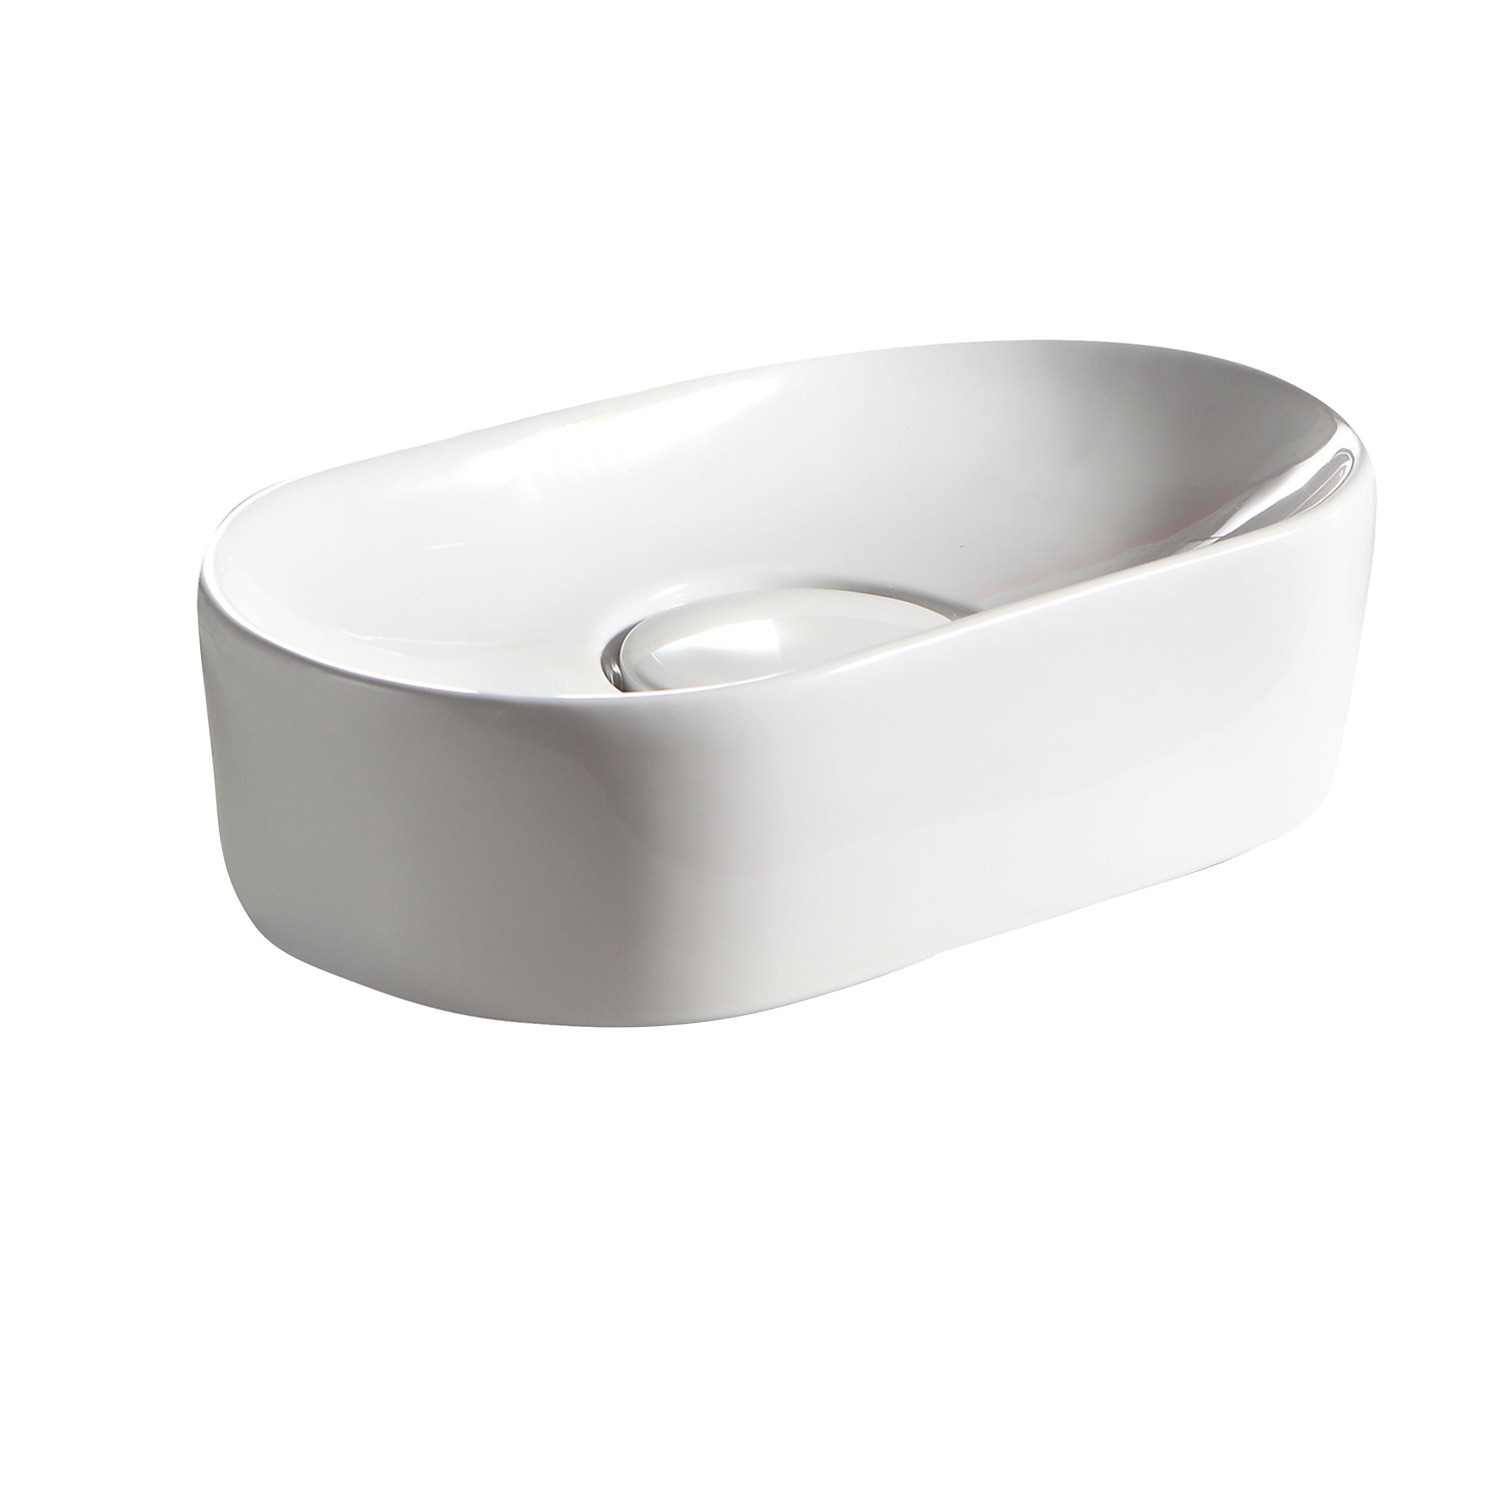 BARCLAY 4-8086WH HONORA 19 3/8 INCH SINGLE BASIN ABOVE COUNTER BATHROOM SINK - WHITE